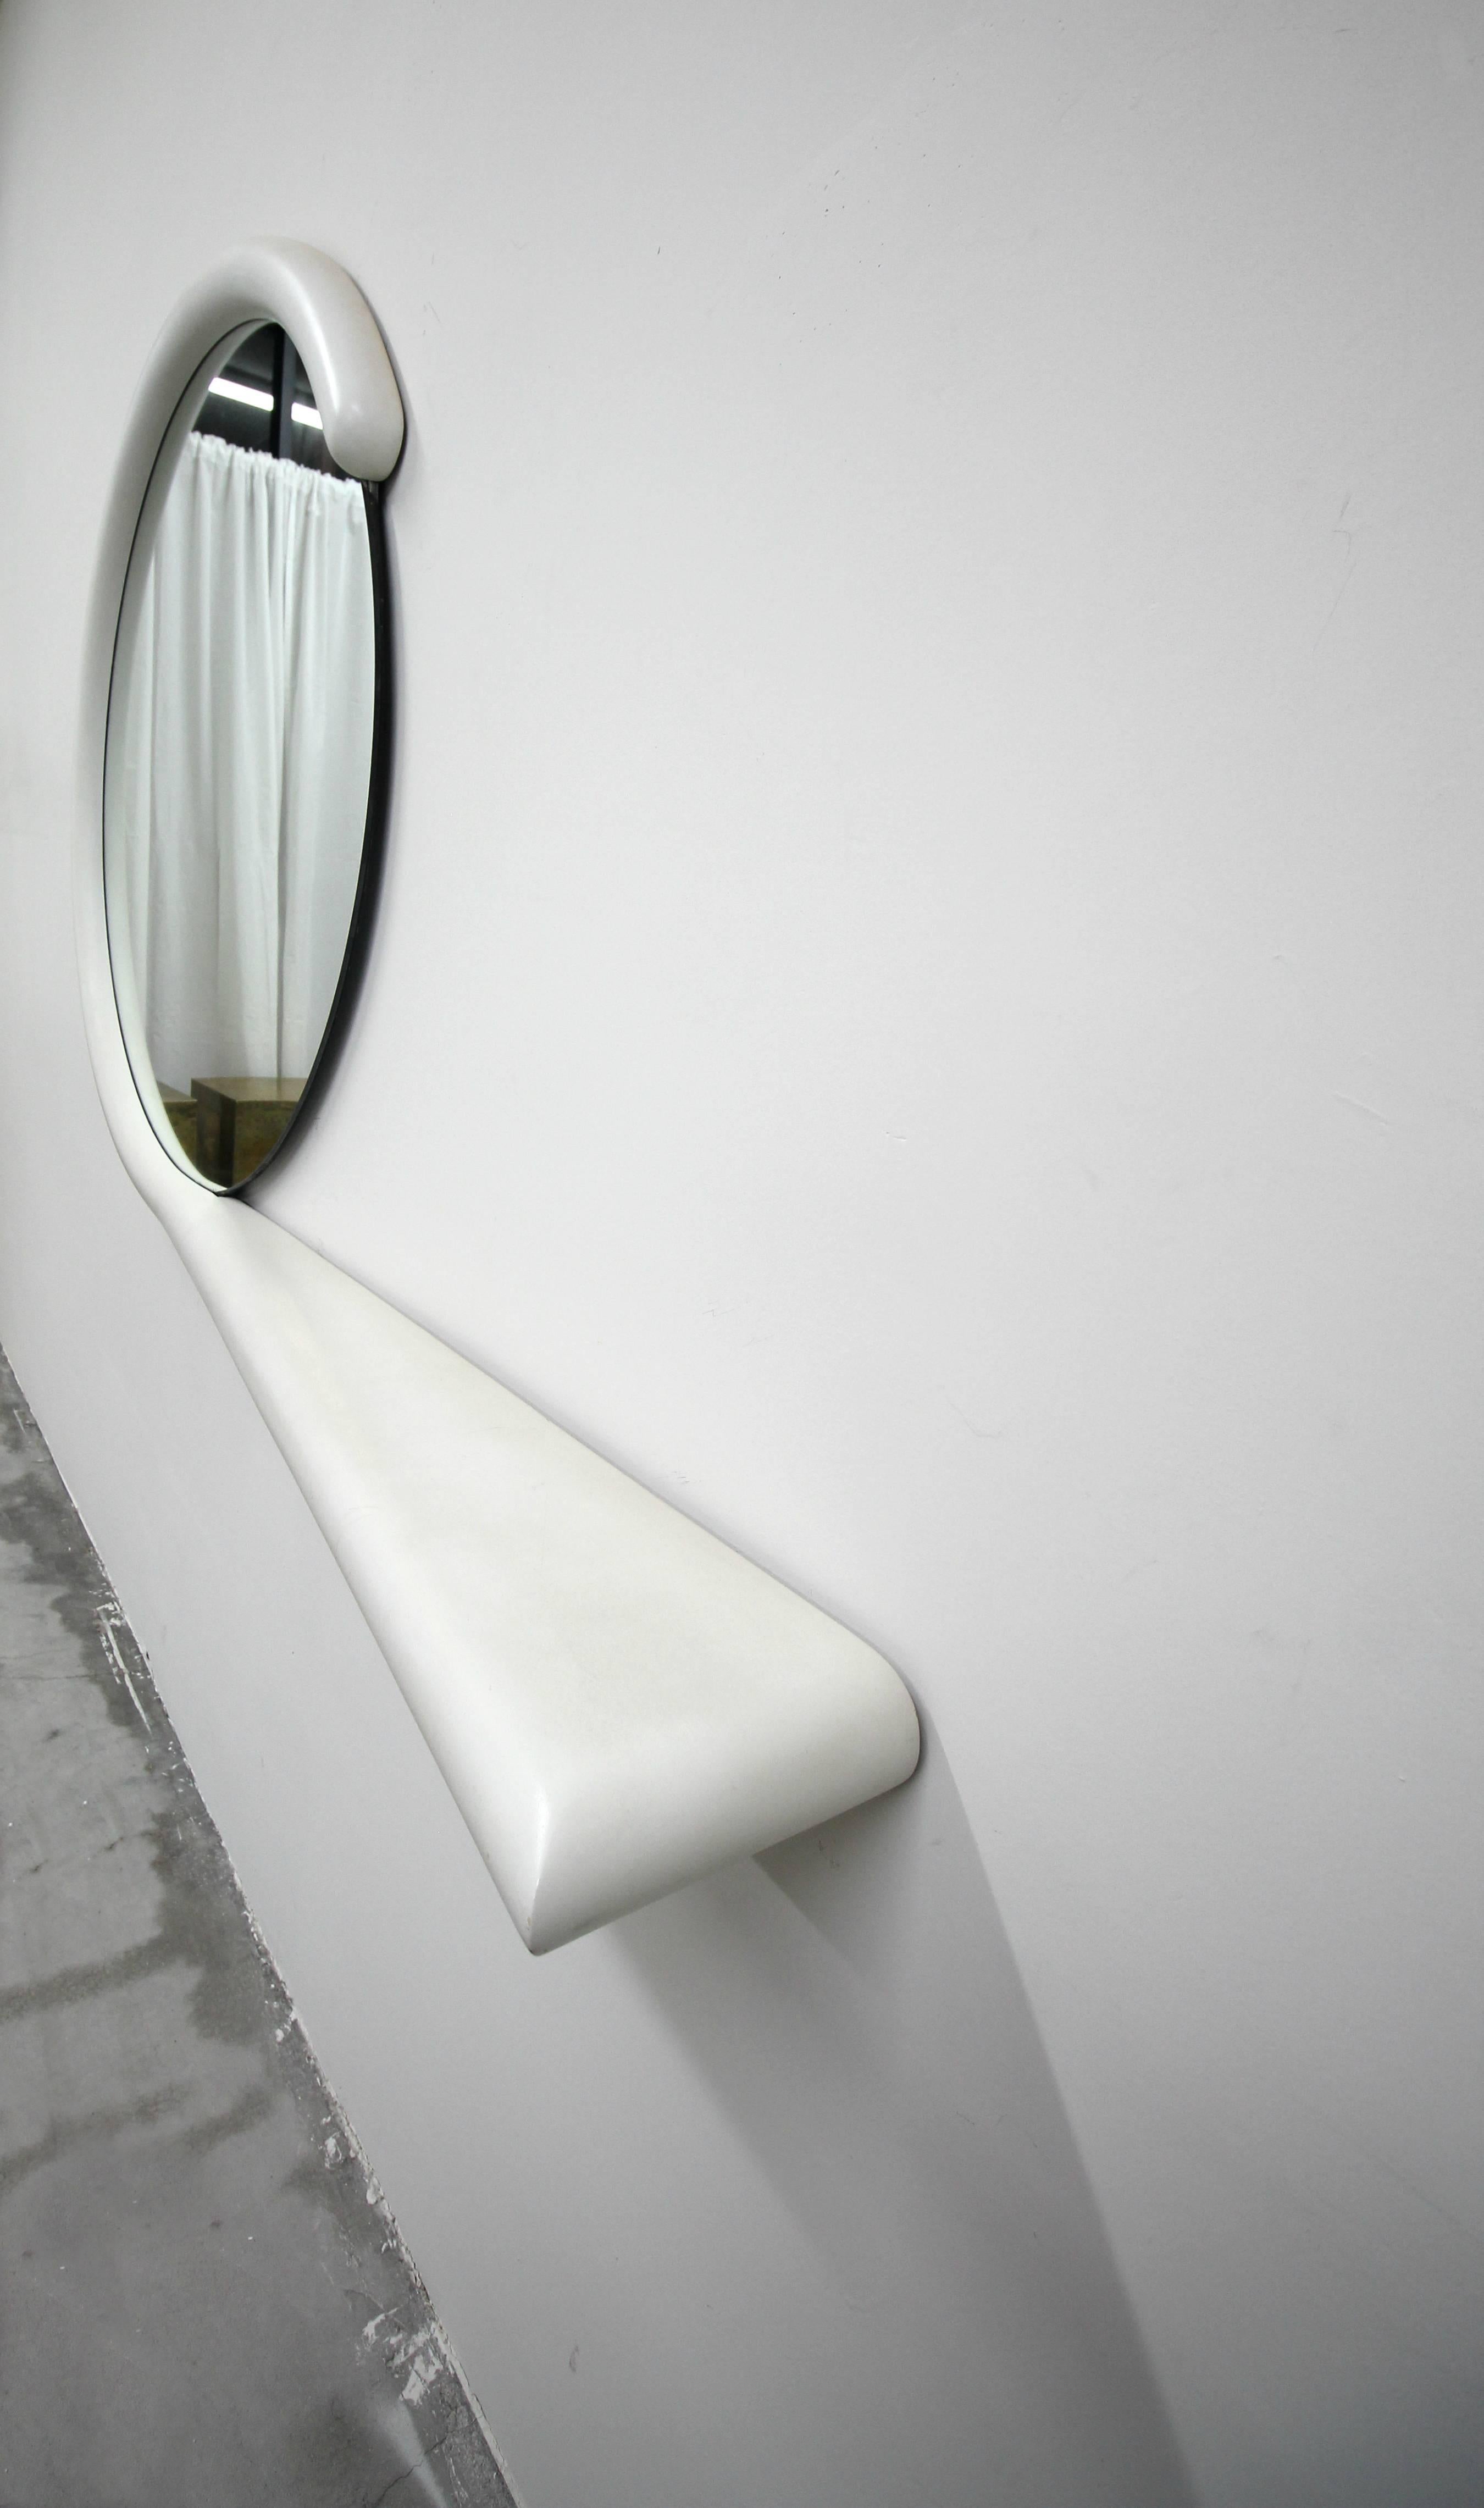 Unique Postmodern, hanging wall mirror with attached console shelf by Jay Spectre. Has very modern appeal that can mesh well with so many decors.